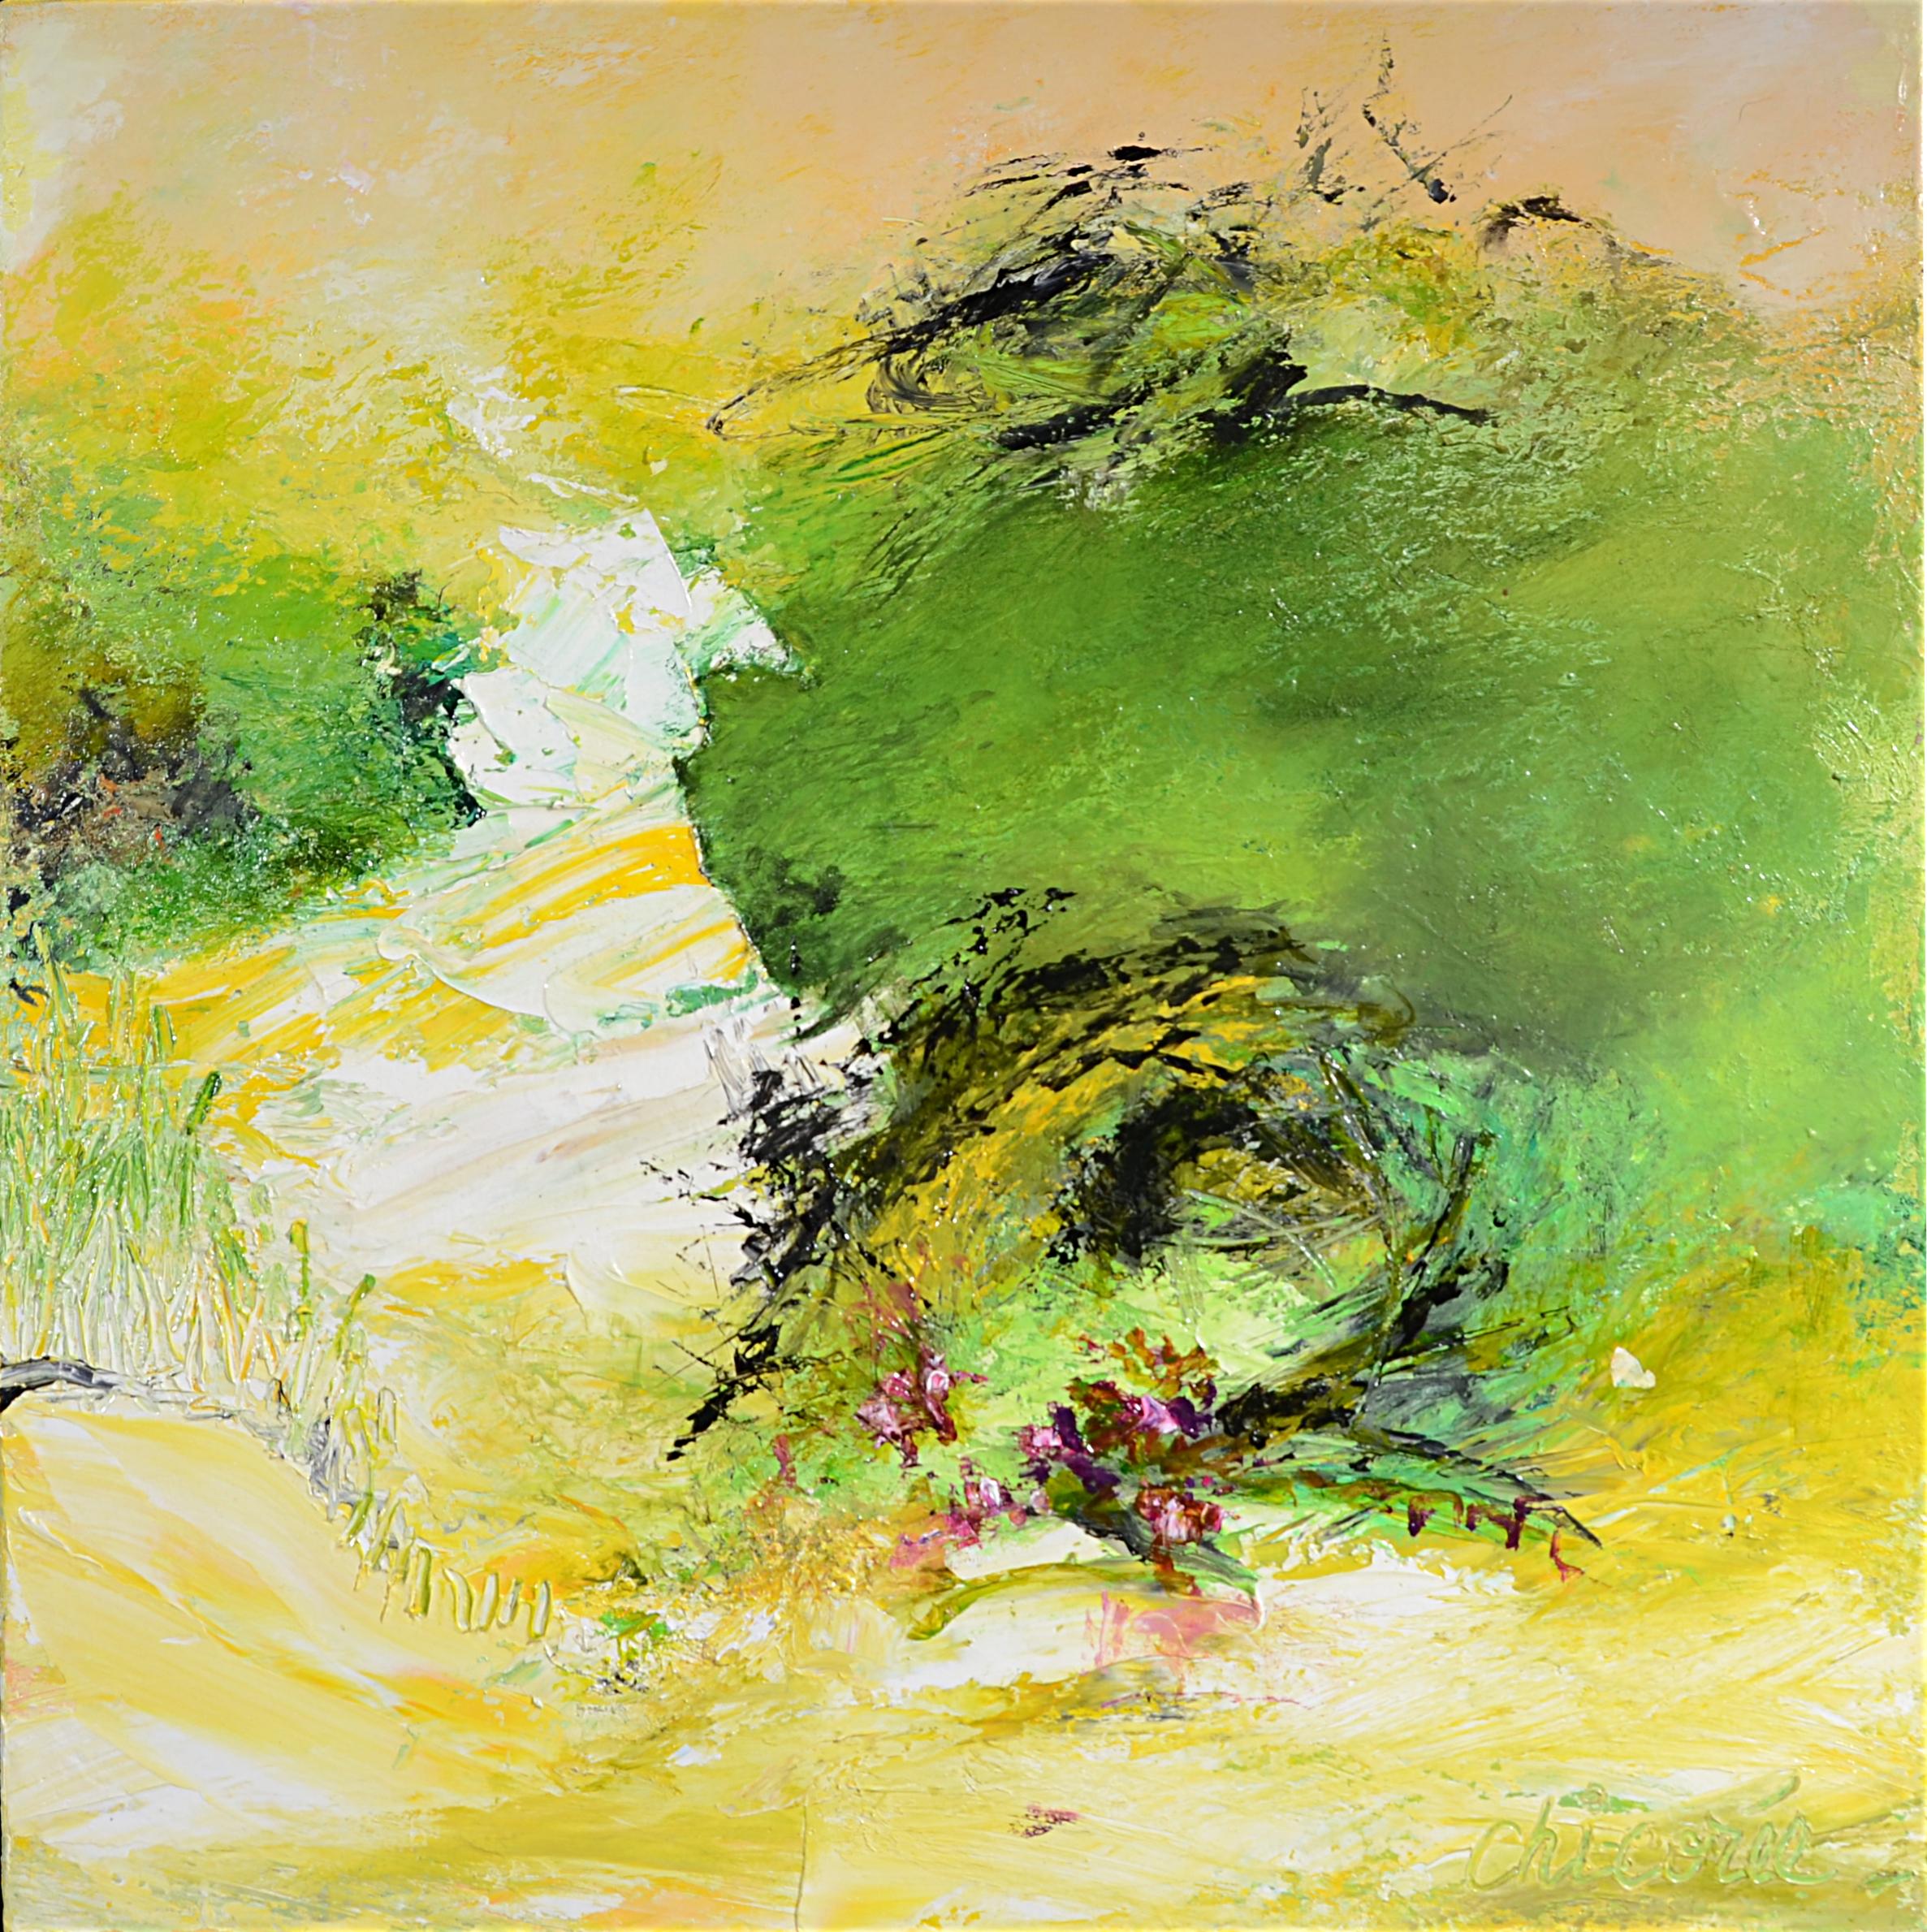 Chicorée Landscape Painting - "Giverny", Yellow and Green Abstract Landscape Squared Oil Painting